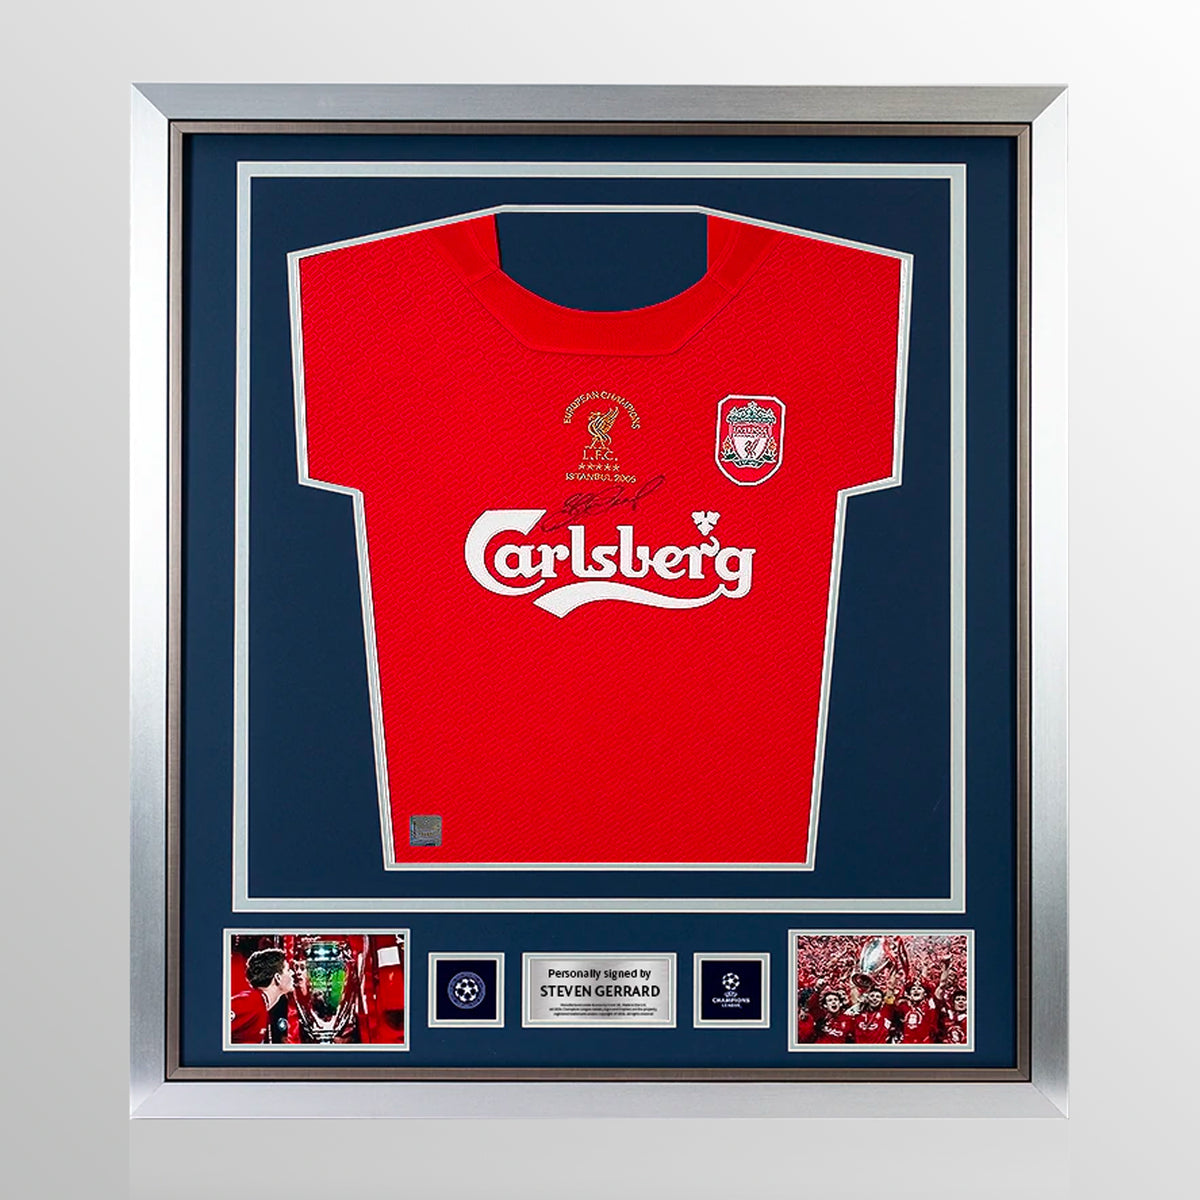 Steven Gerrard Official UEFA Champions League Signed and Framed Liverpool 2005 Home Shirt: 2005 Final Edition UEFA Club Competitions Online Store